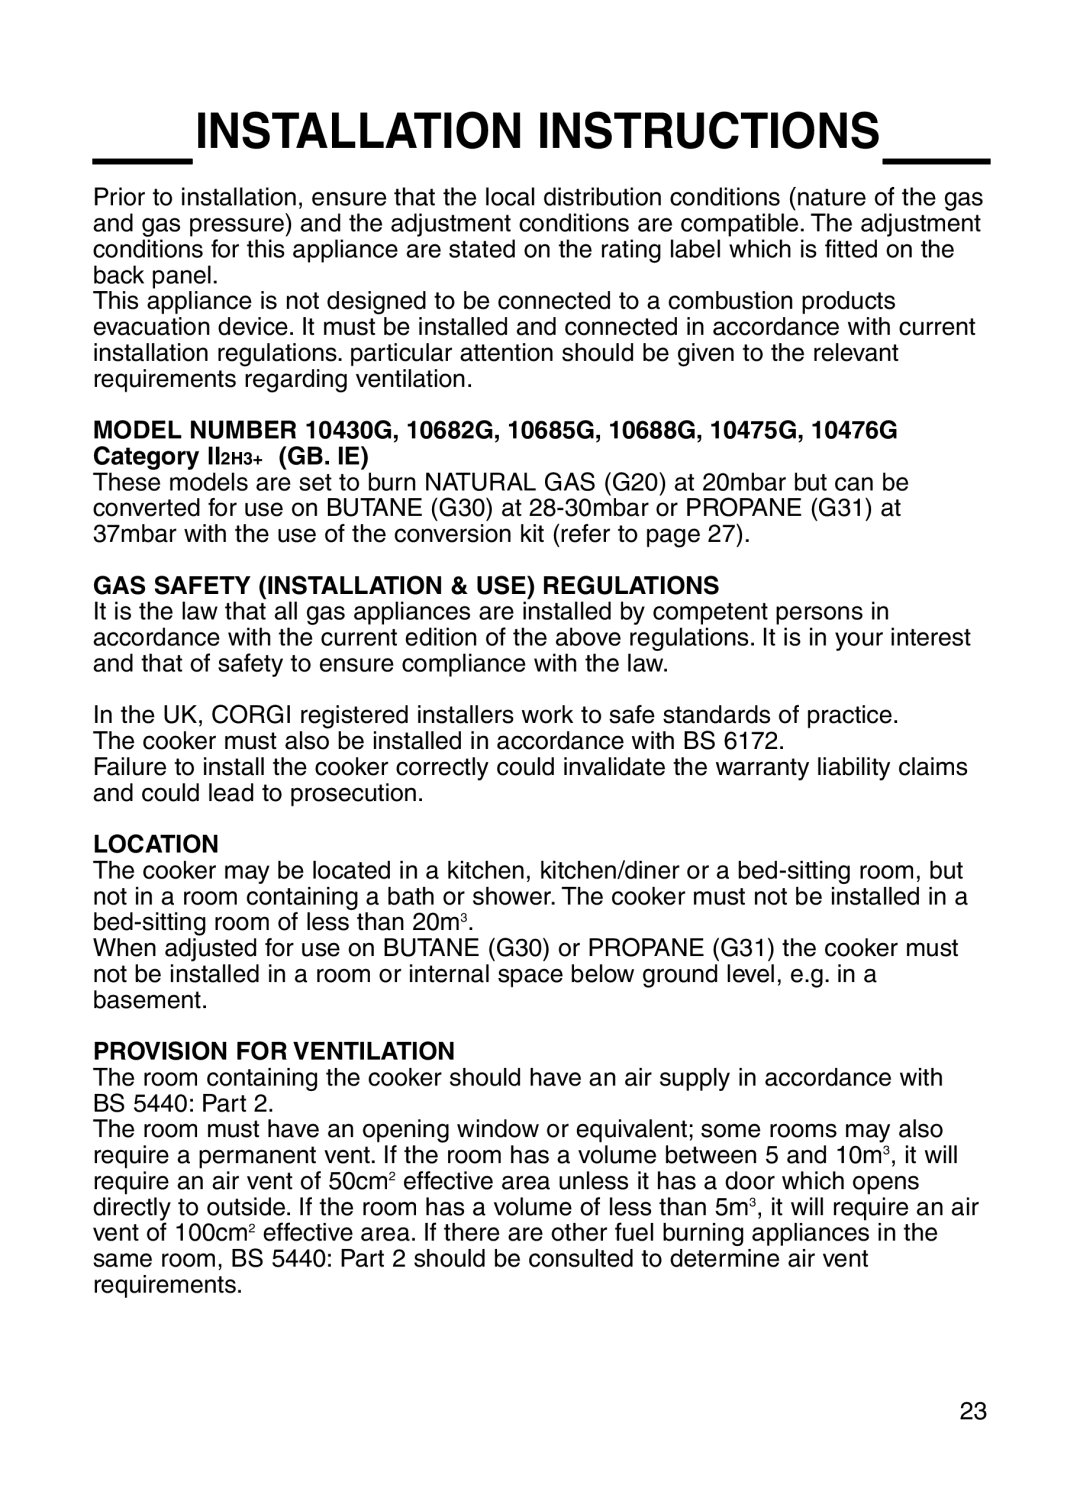 Cannon 10430G Installation Instructions, Gas Safety Installation & Use Regulations, Location, Provision For Ventilation 